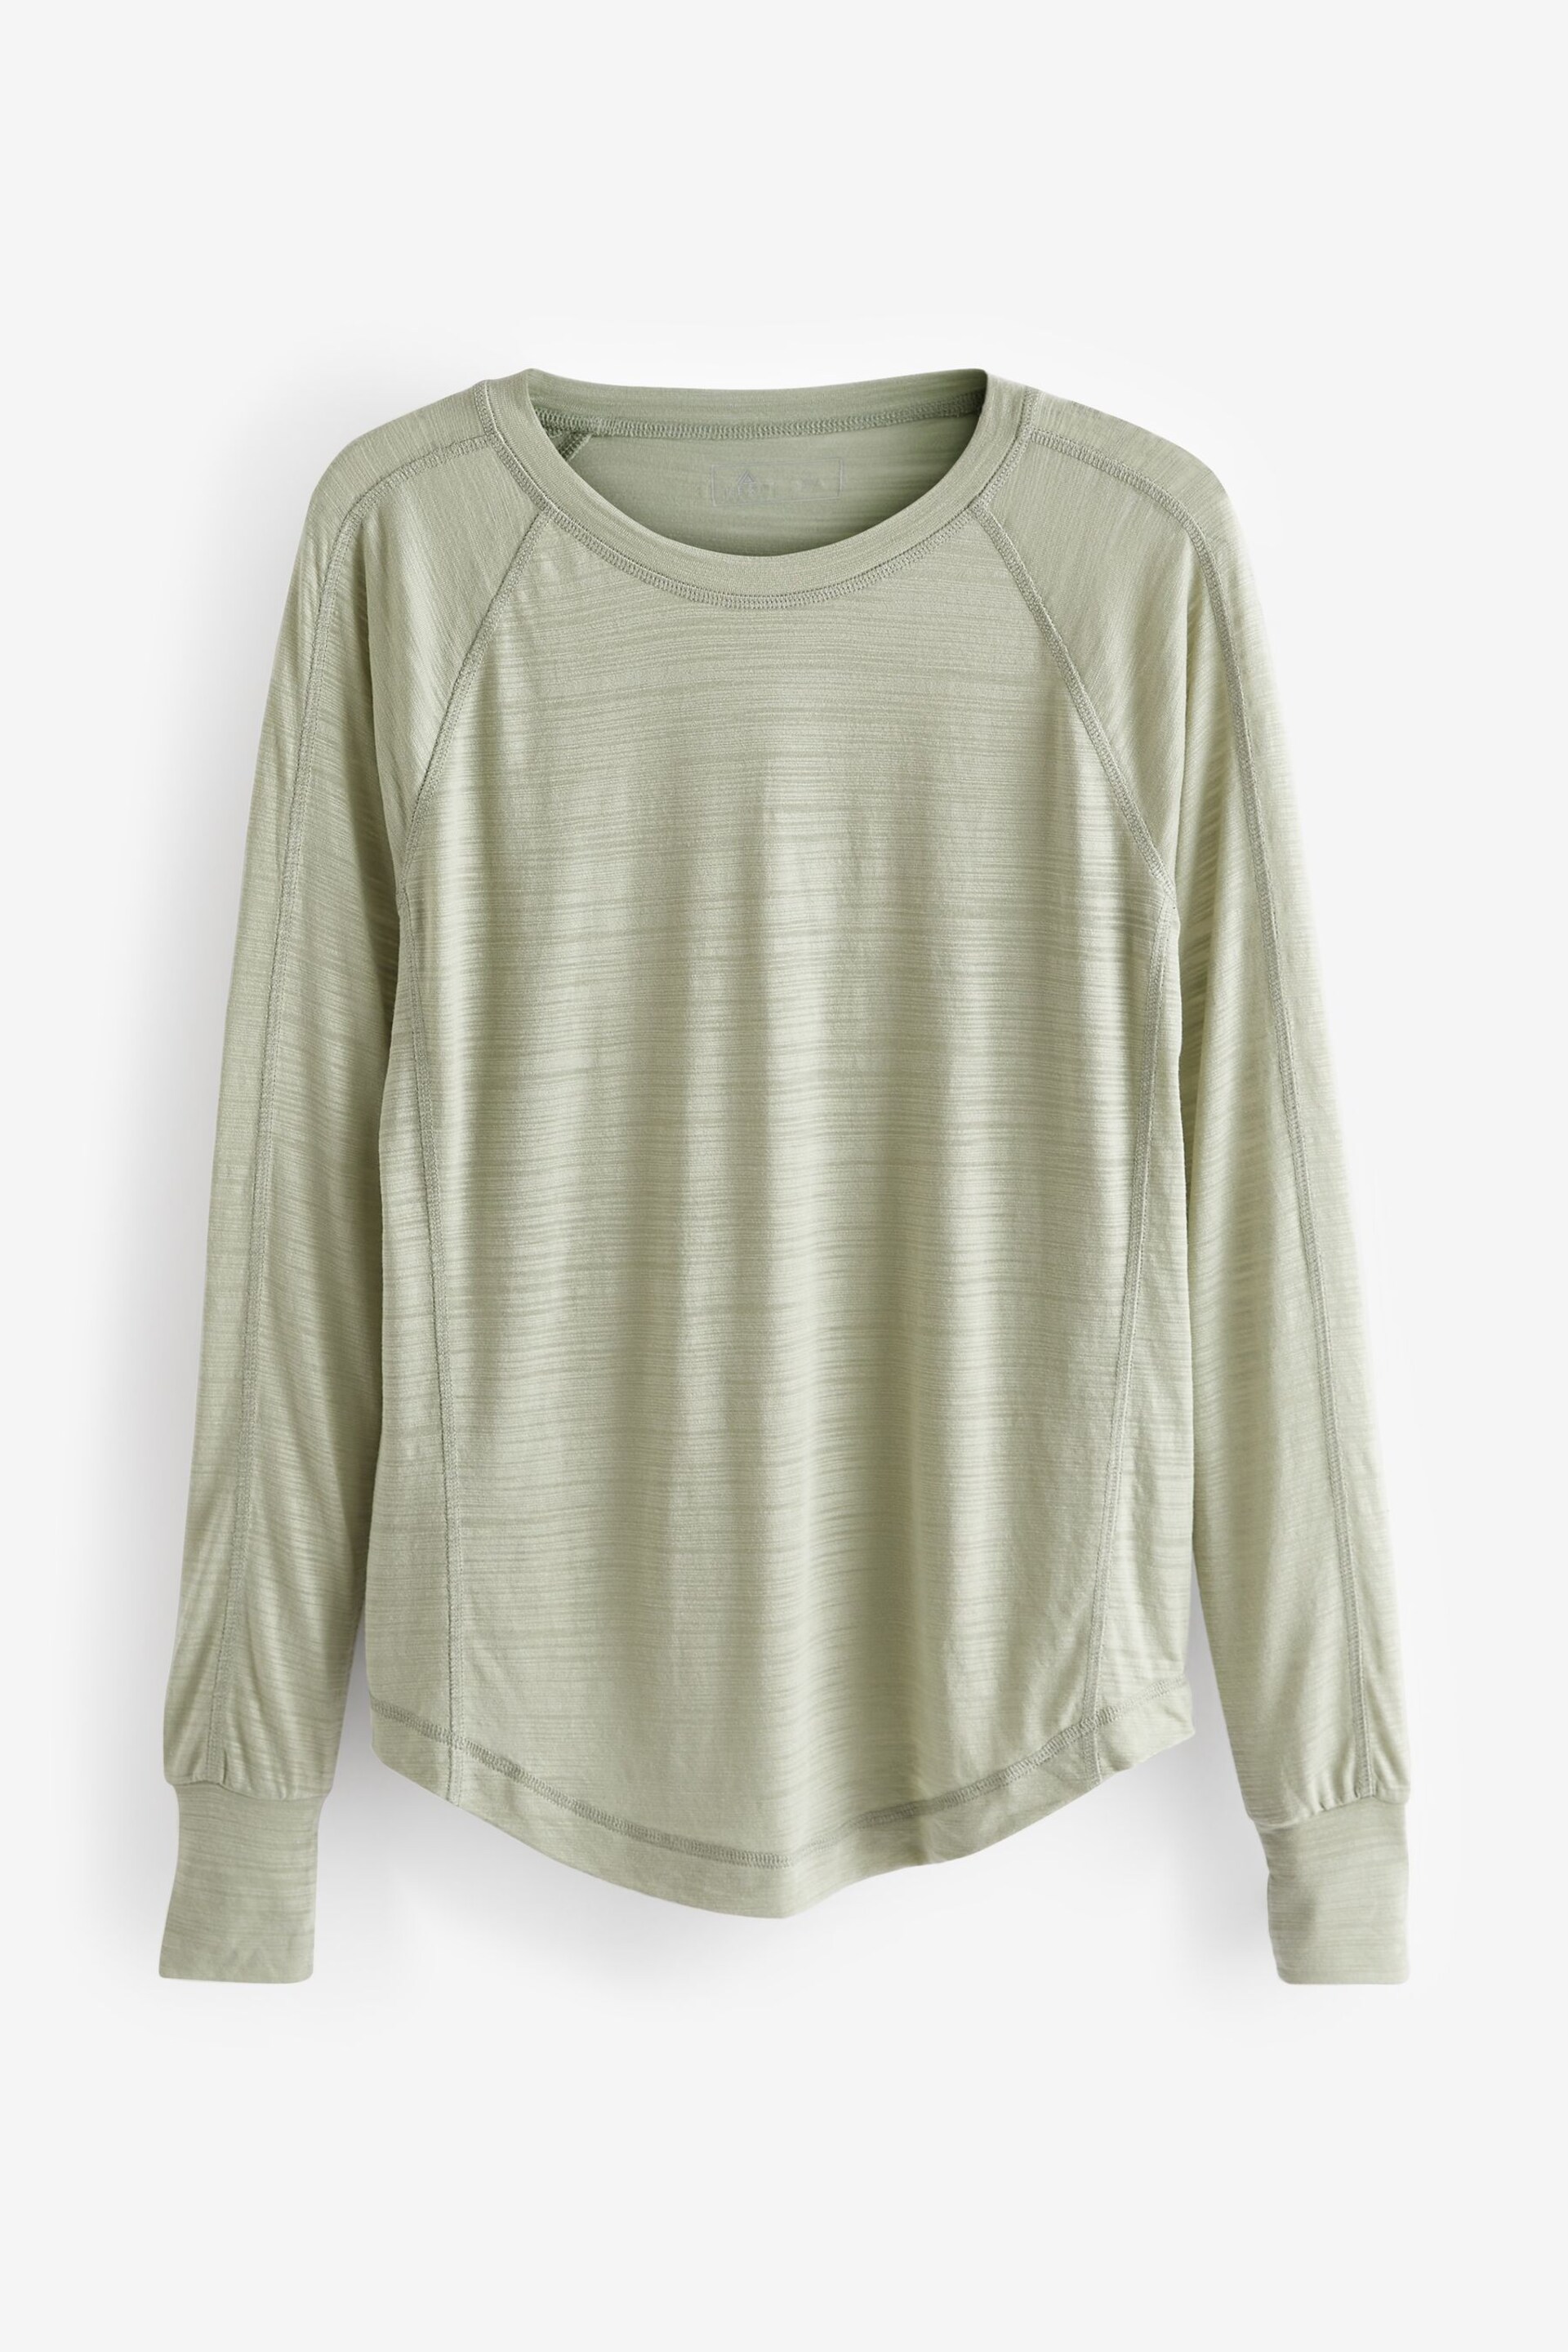 Sage Green Active Lightweight Stitch Detail Long Sleeve Top - Image 5 of 6